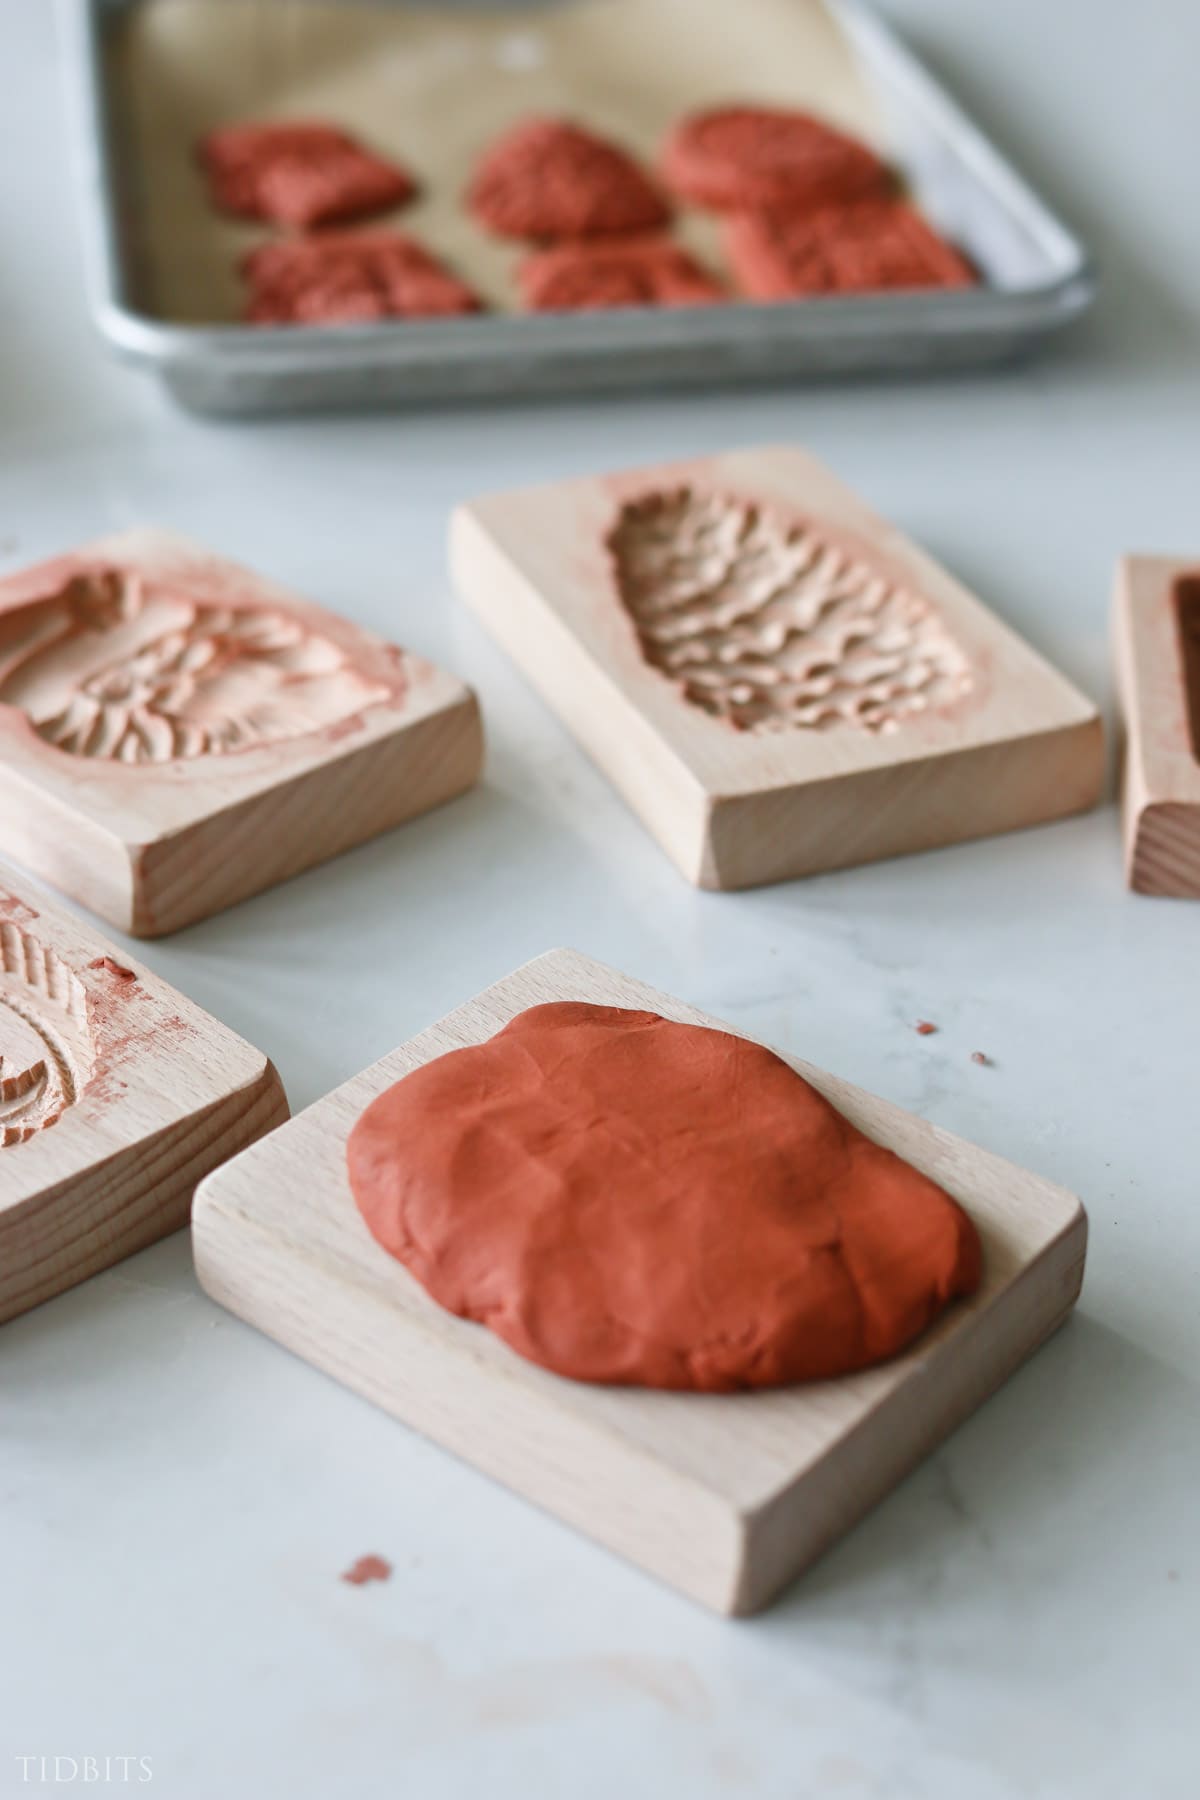 step two: making air dry clay ornaments - press into the mold